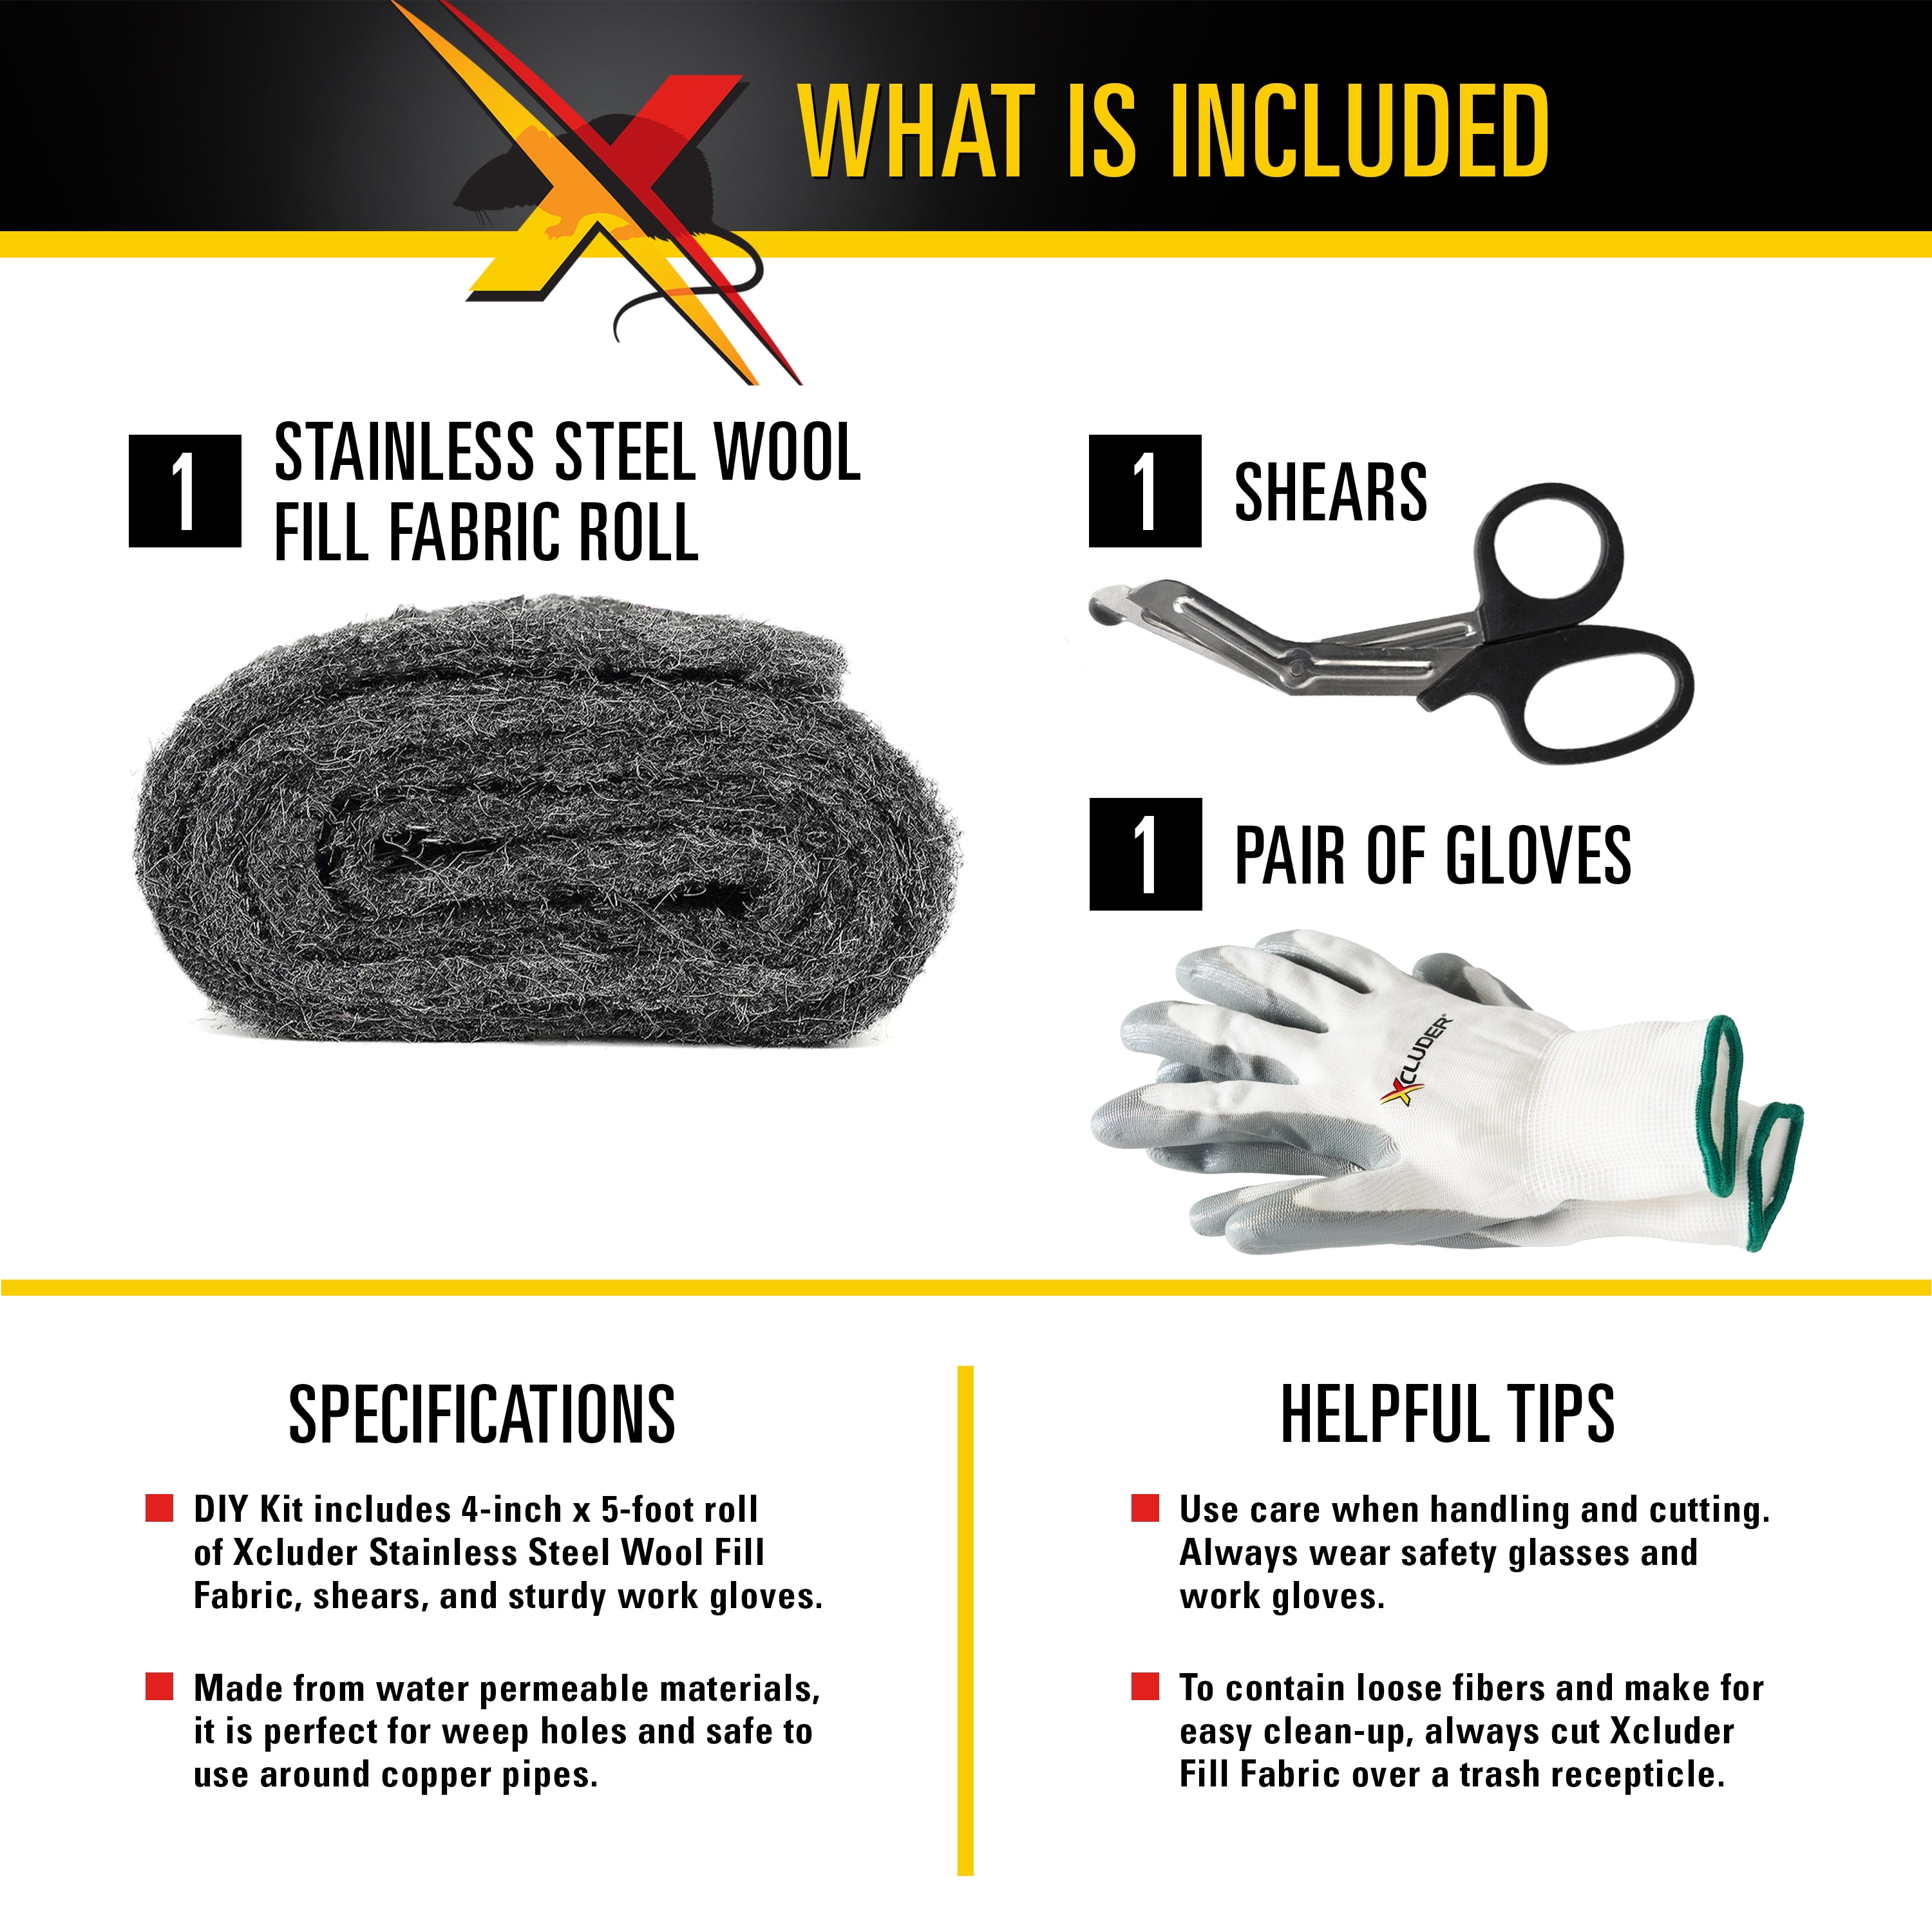 Xcluder Stainless Steel Wool Fill Fabric, DIY Kit with Inspection Tool